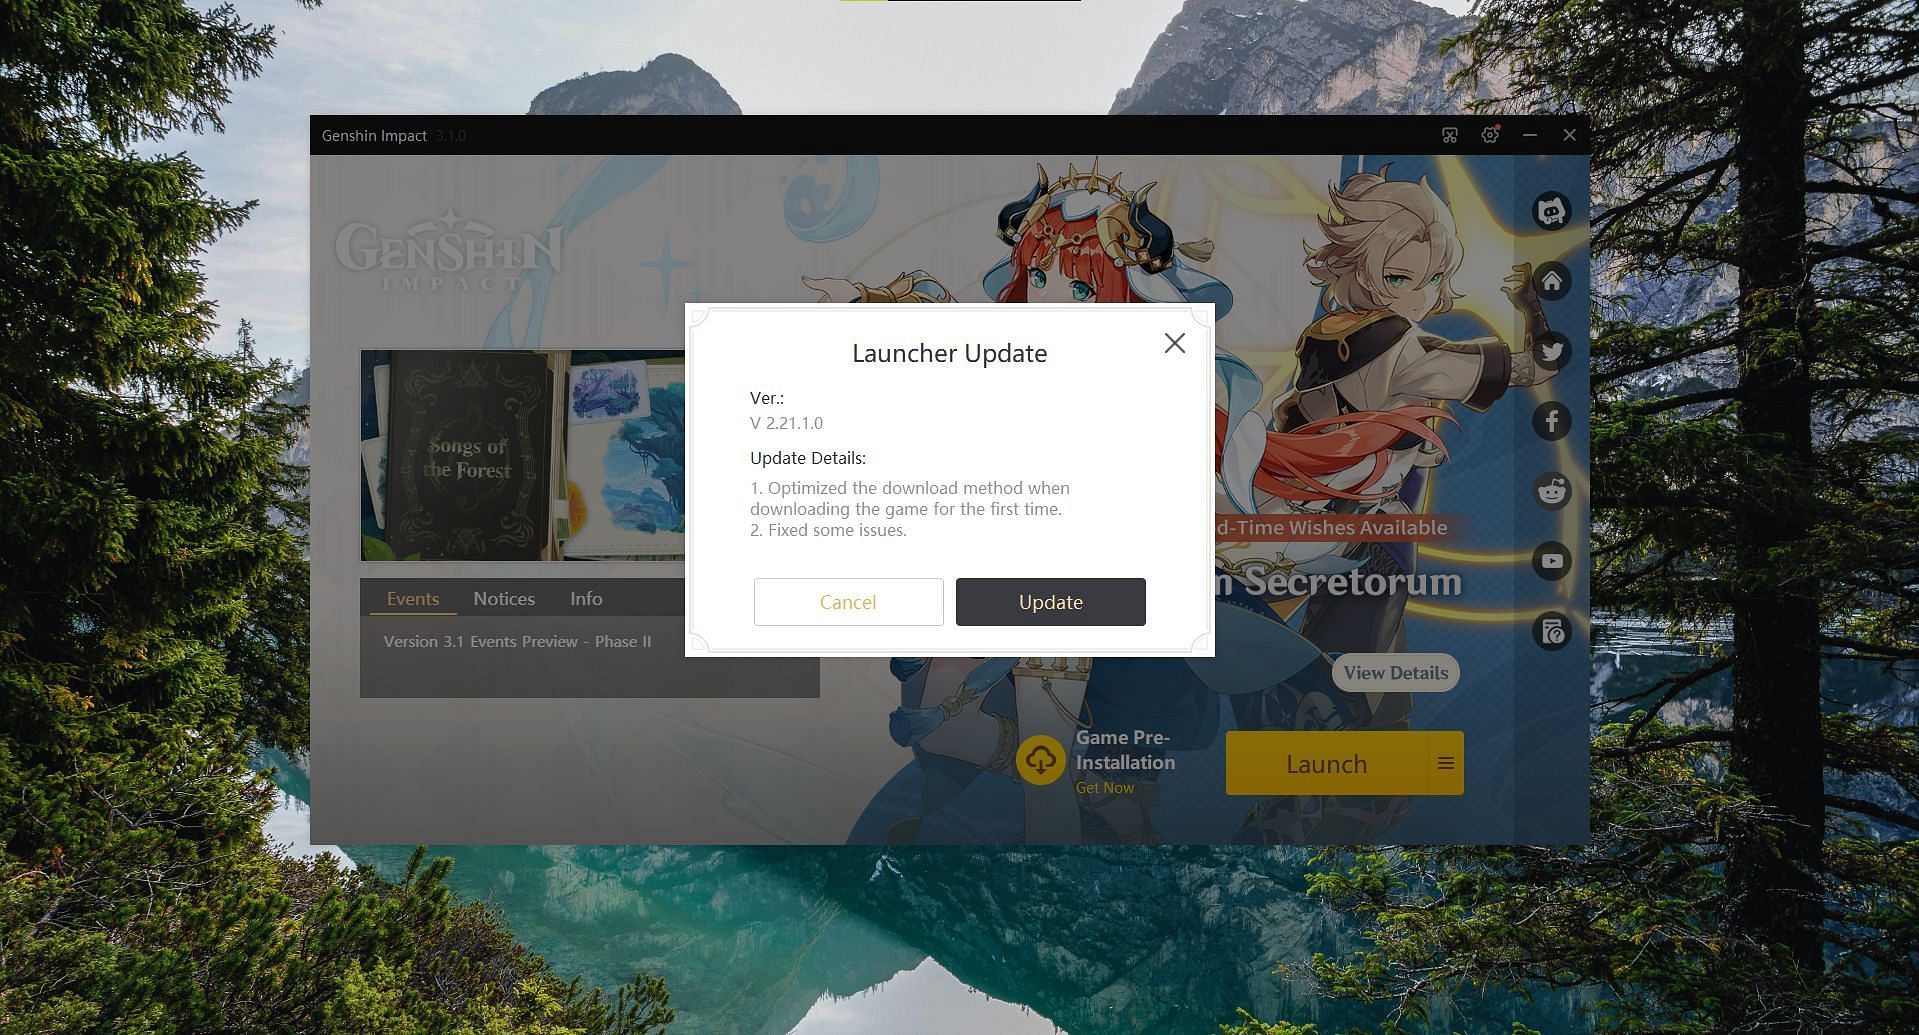 Update the launcher to use the pre-installation function (Image via HoYoverse)